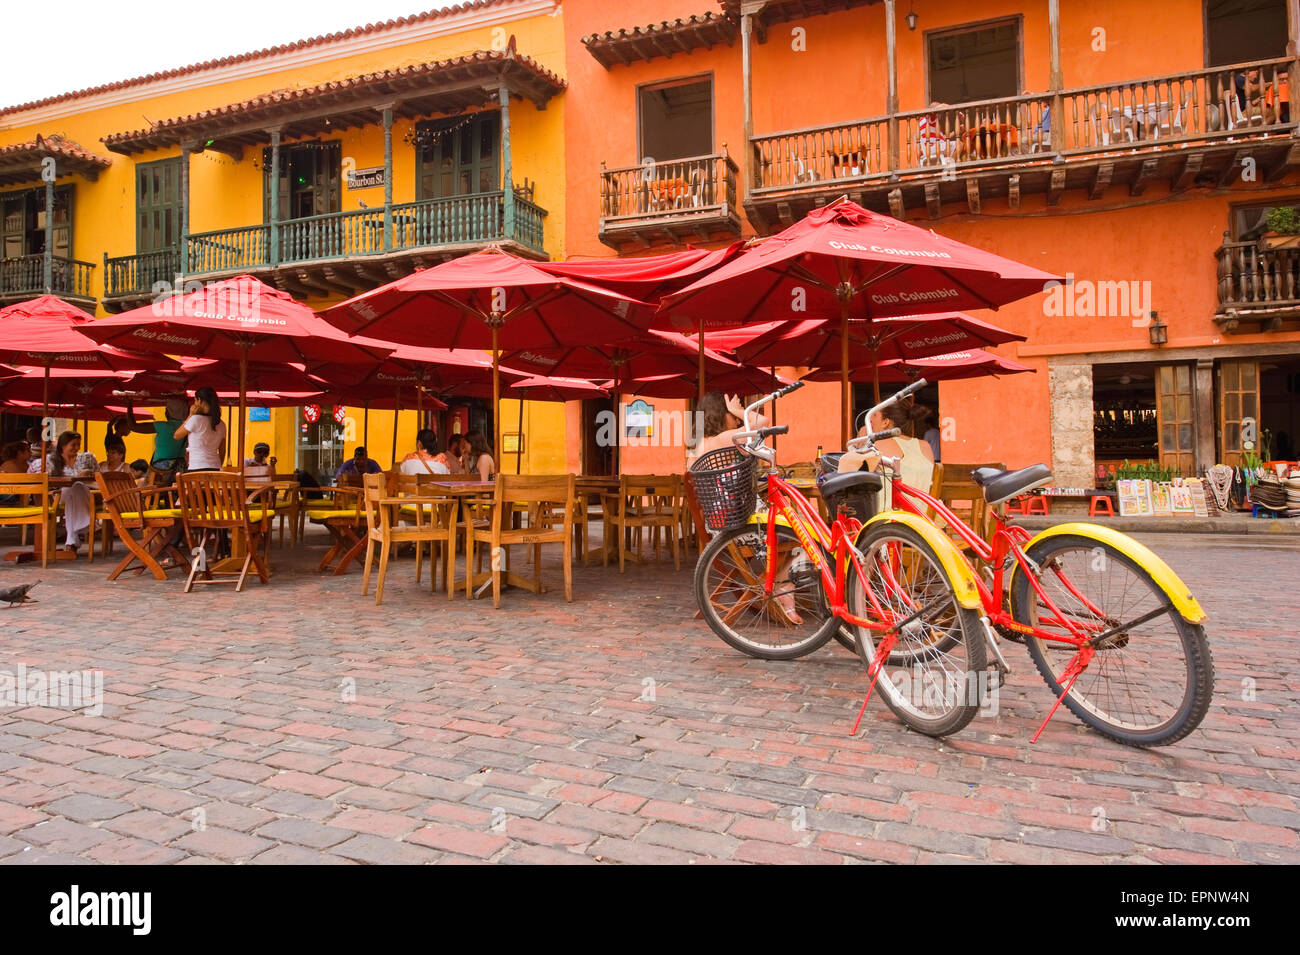 A typical plaza (square) in Cartagena, Colombia, South America Stock Photo